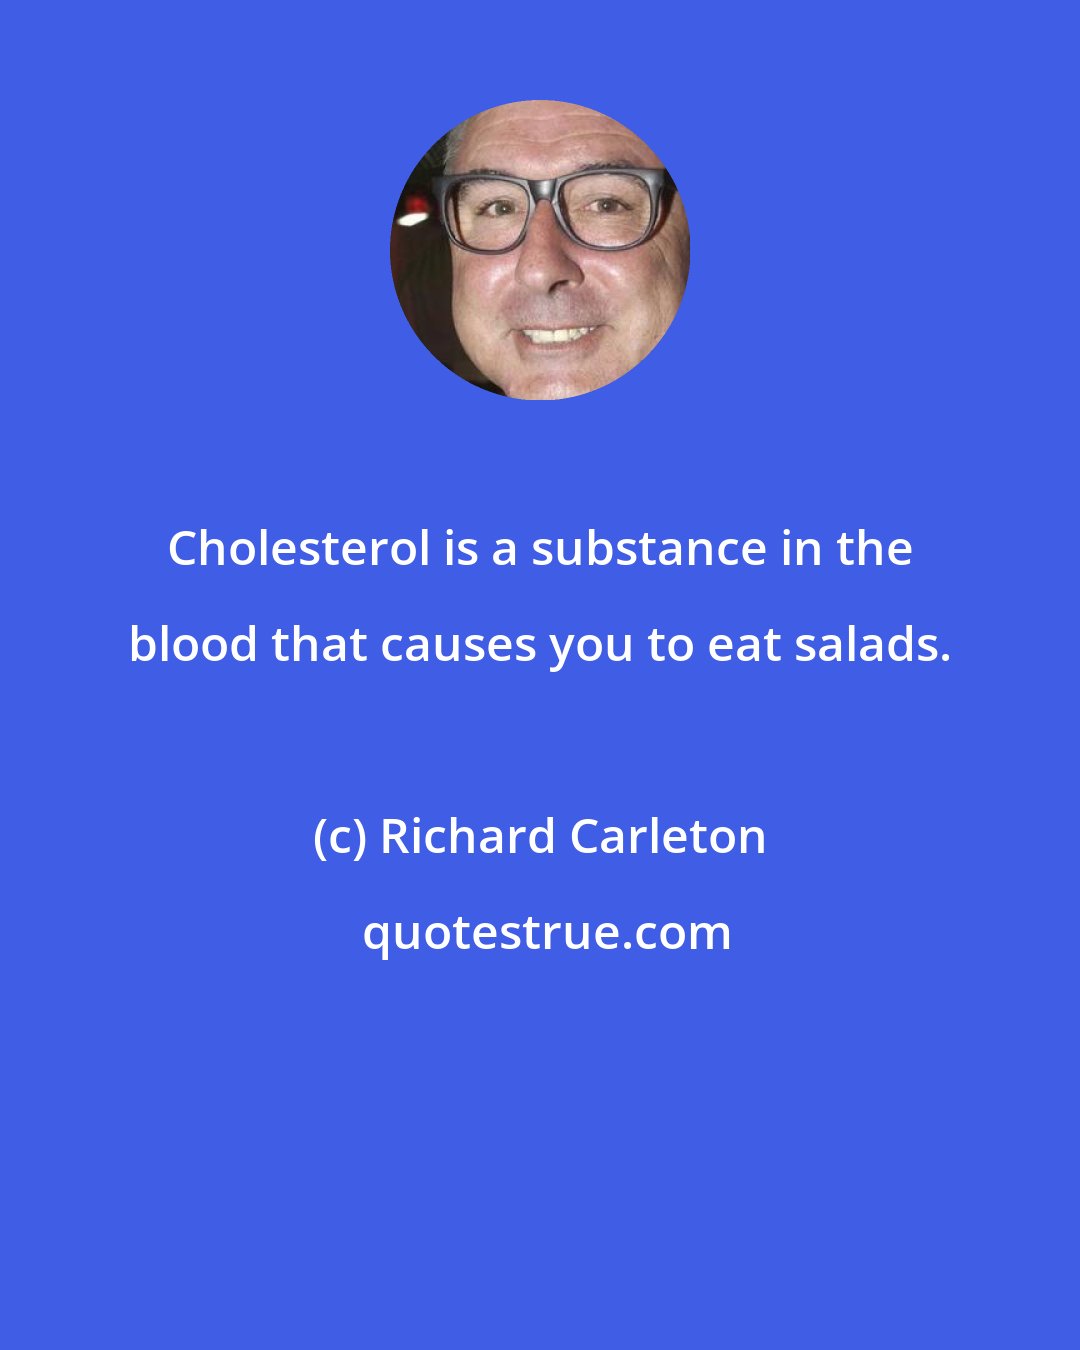 Richard Carleton: Cholesterol is a substance in the blood that causes you to eat salads.